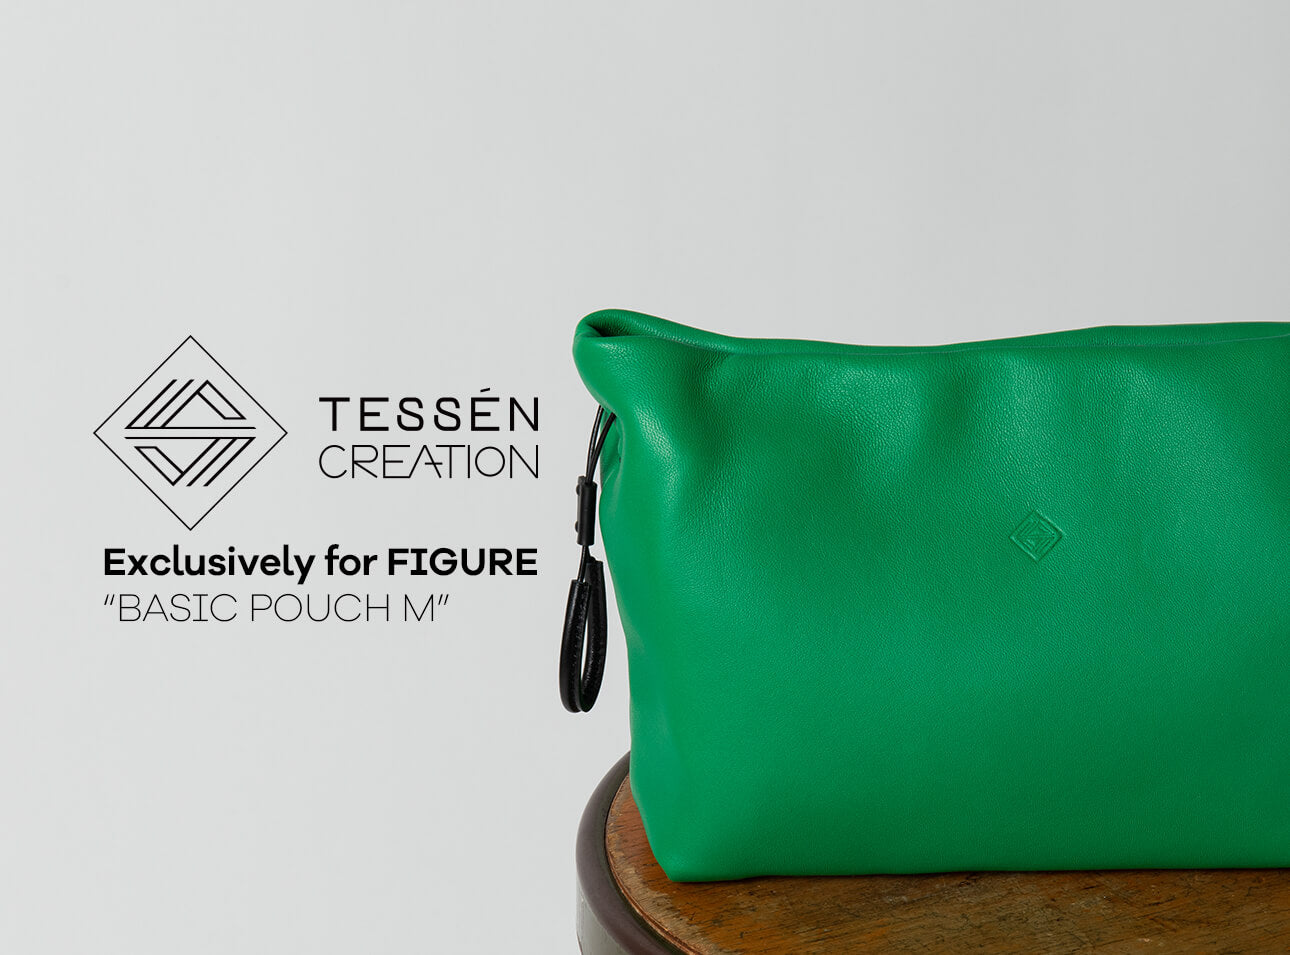 TESSÉN CREATION Exclusively for FIGURE